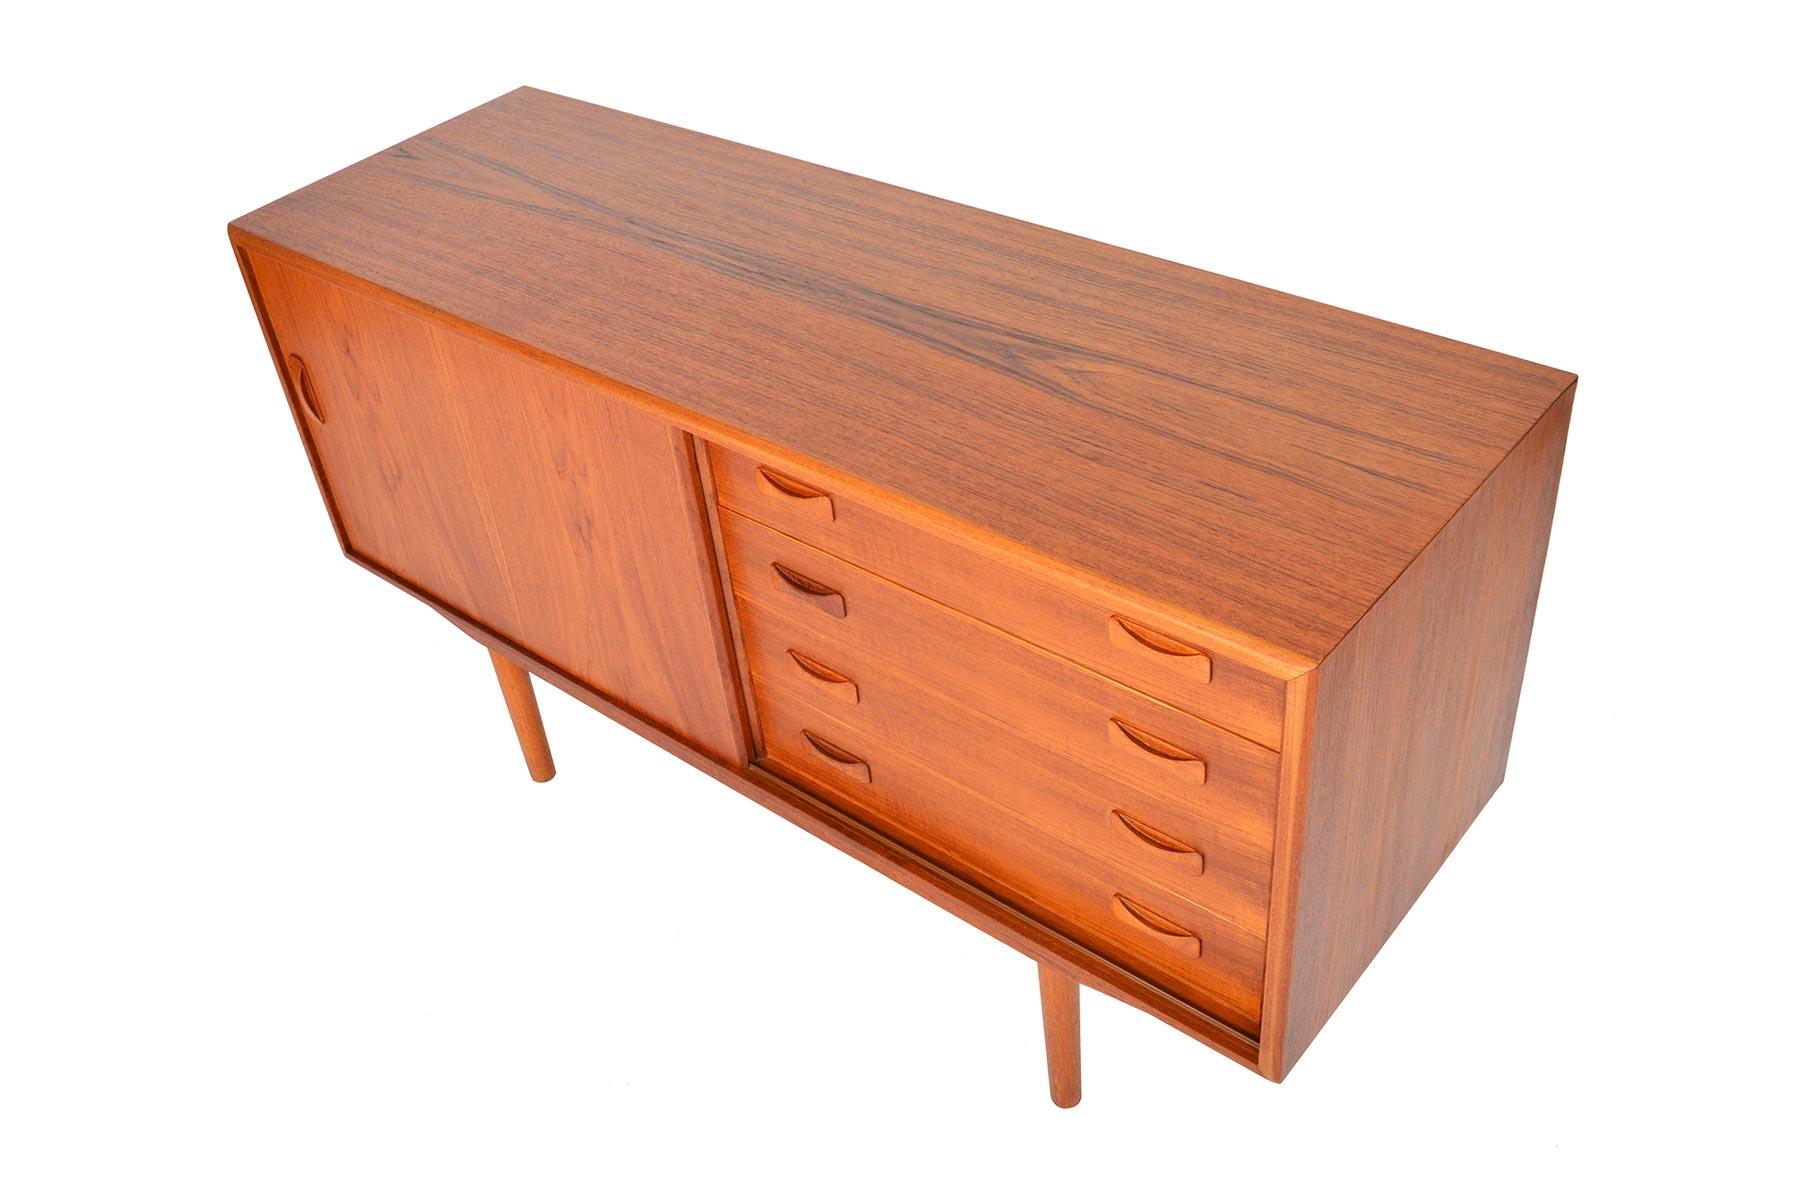 20th Century Small Midcentury Teak Sliding Door Credenza by Clausen and Søn